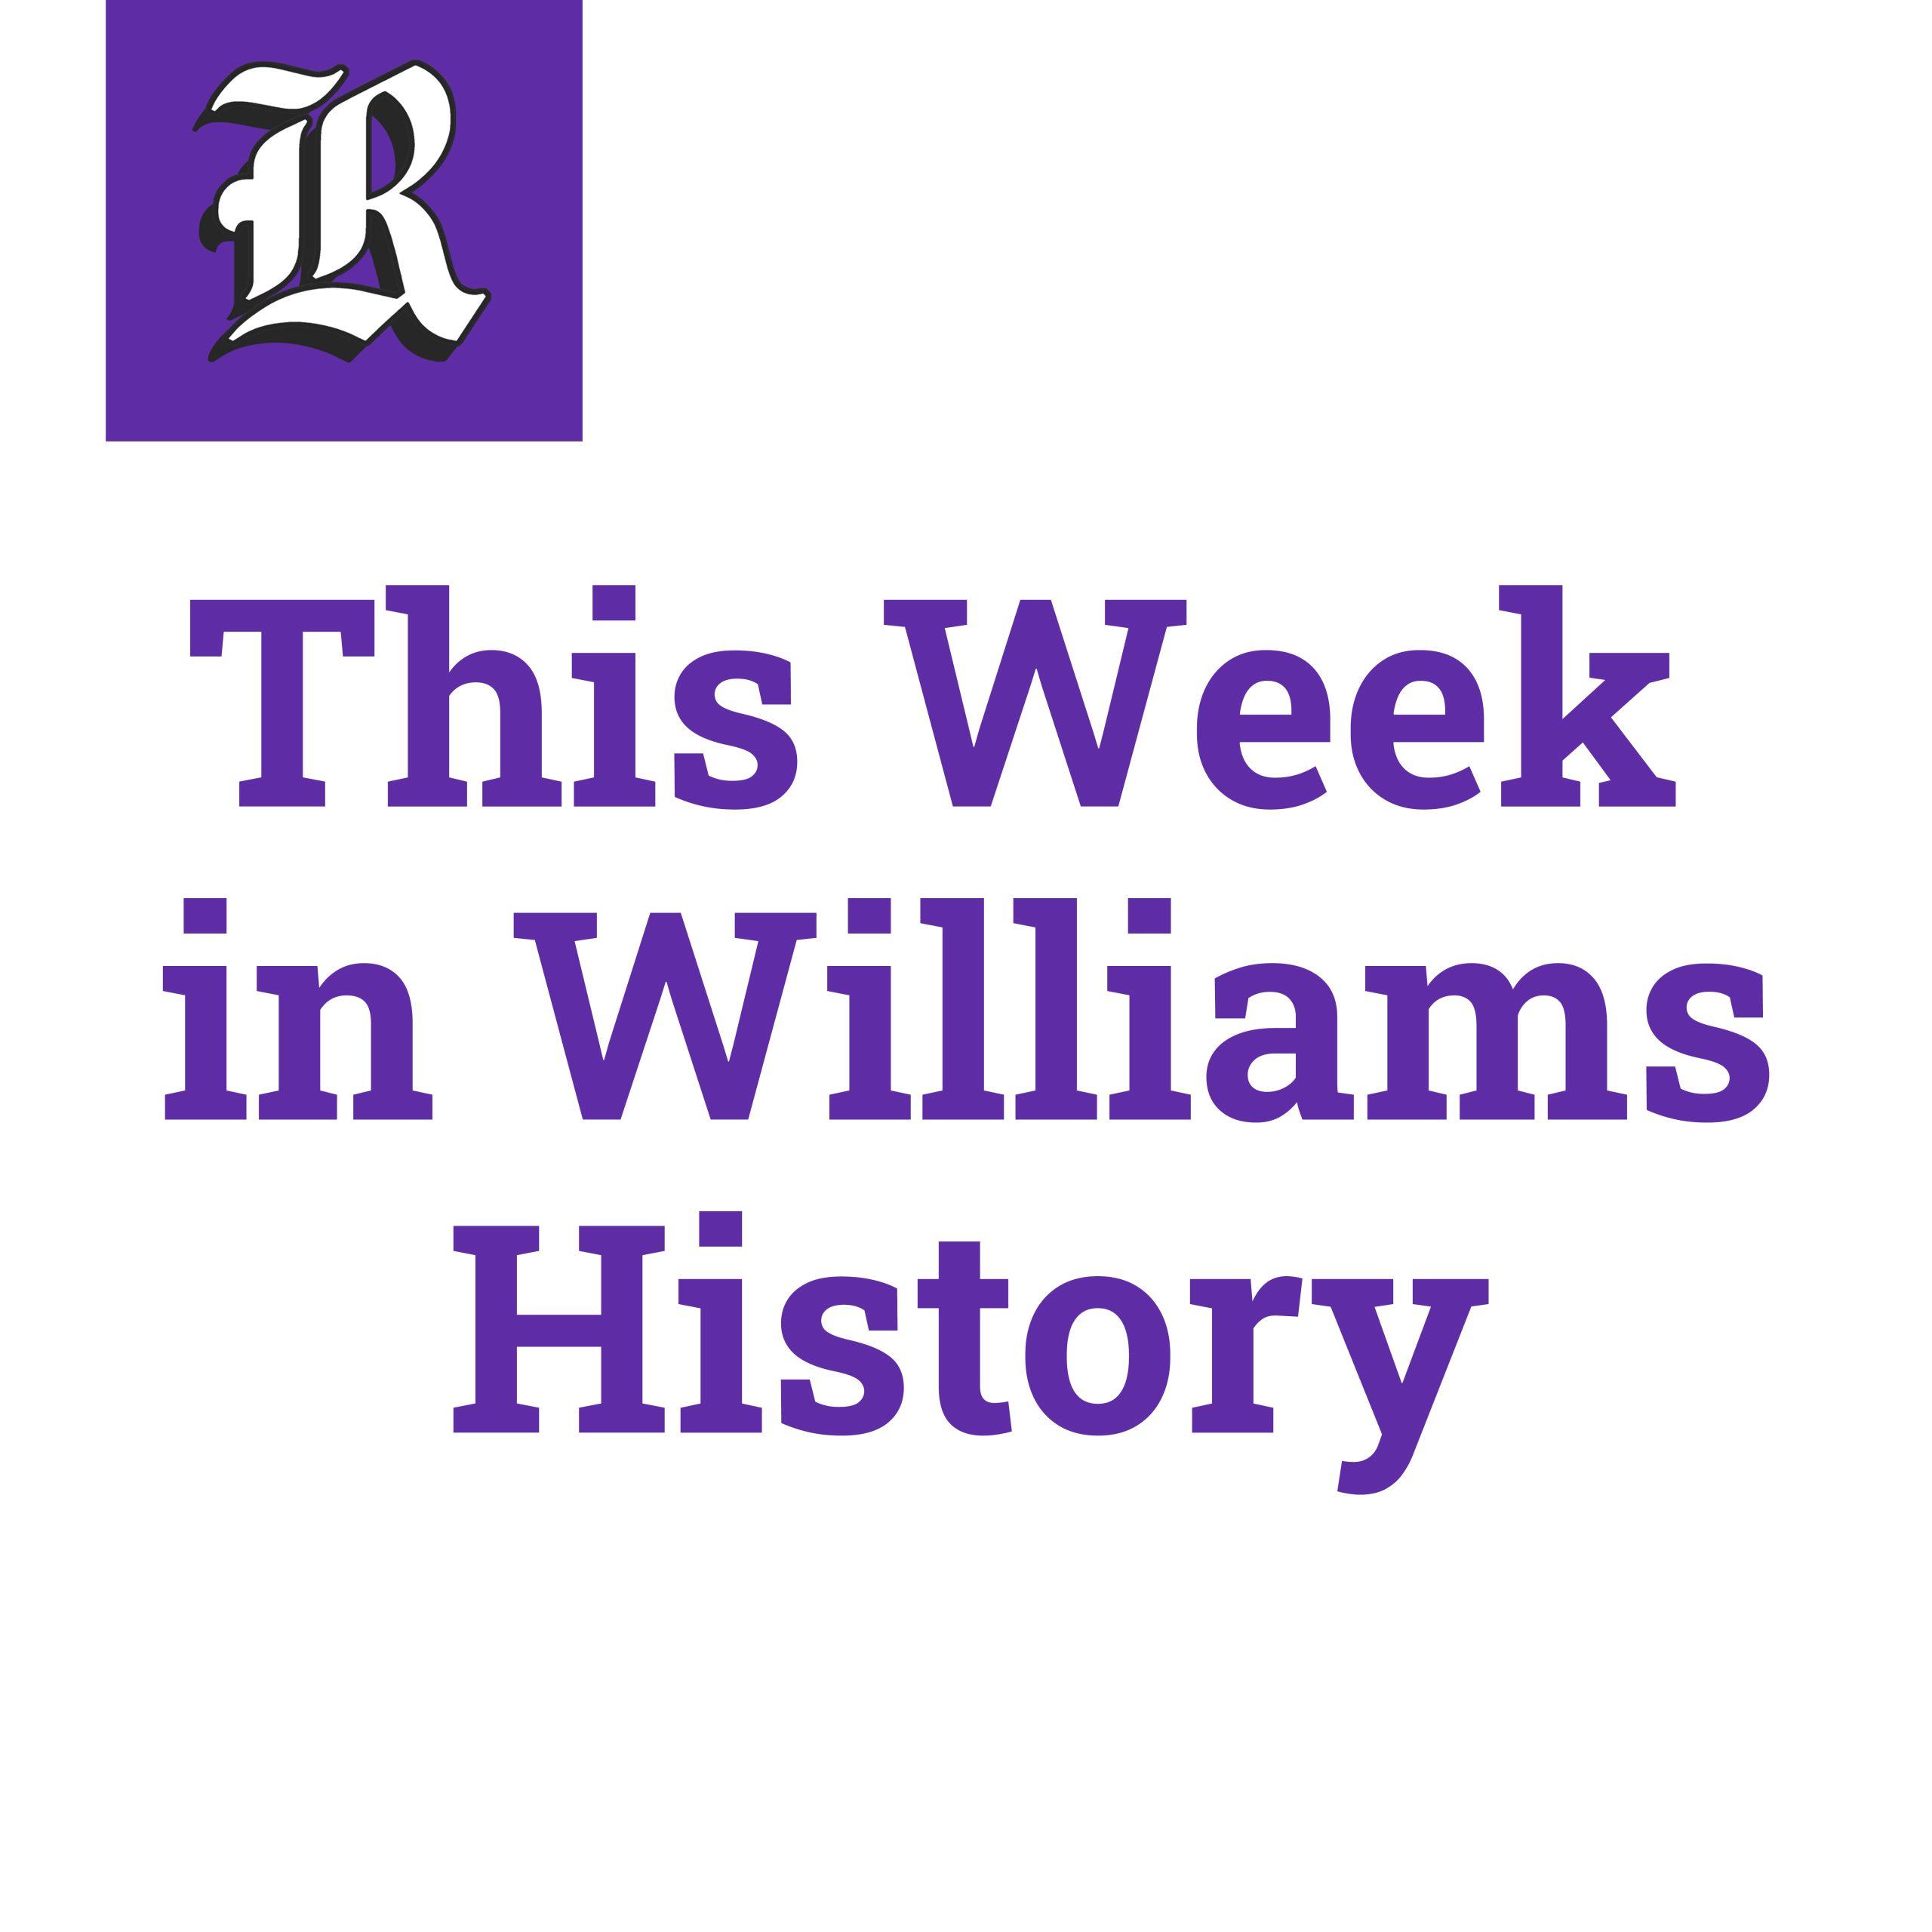 This week in Williams history: Stolen computer, PeopleSoft, bookstore plans